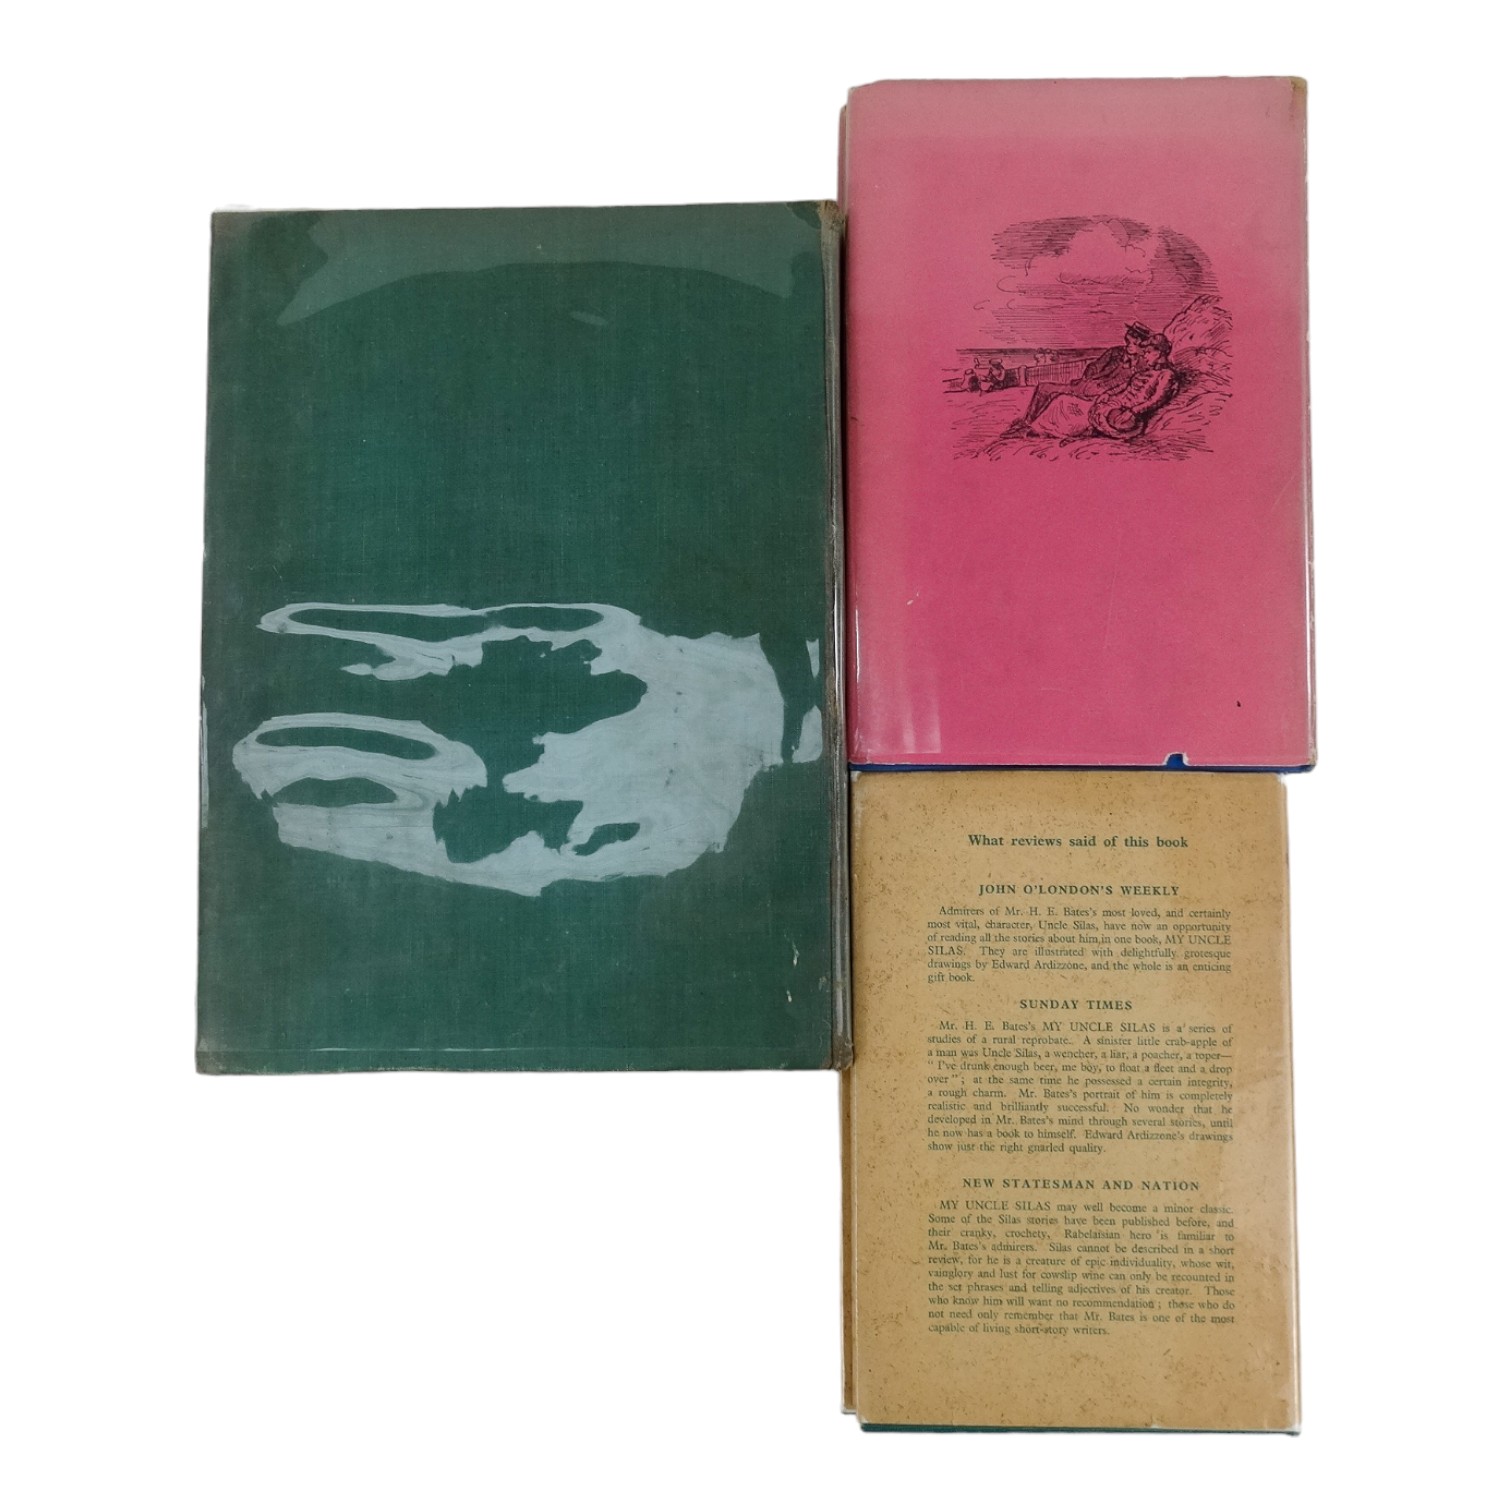 BATES H.E. My Uncle Silas - Jonathan Cape 1939, green cloth boards, together with Michael Joseph - Image 4 of 4